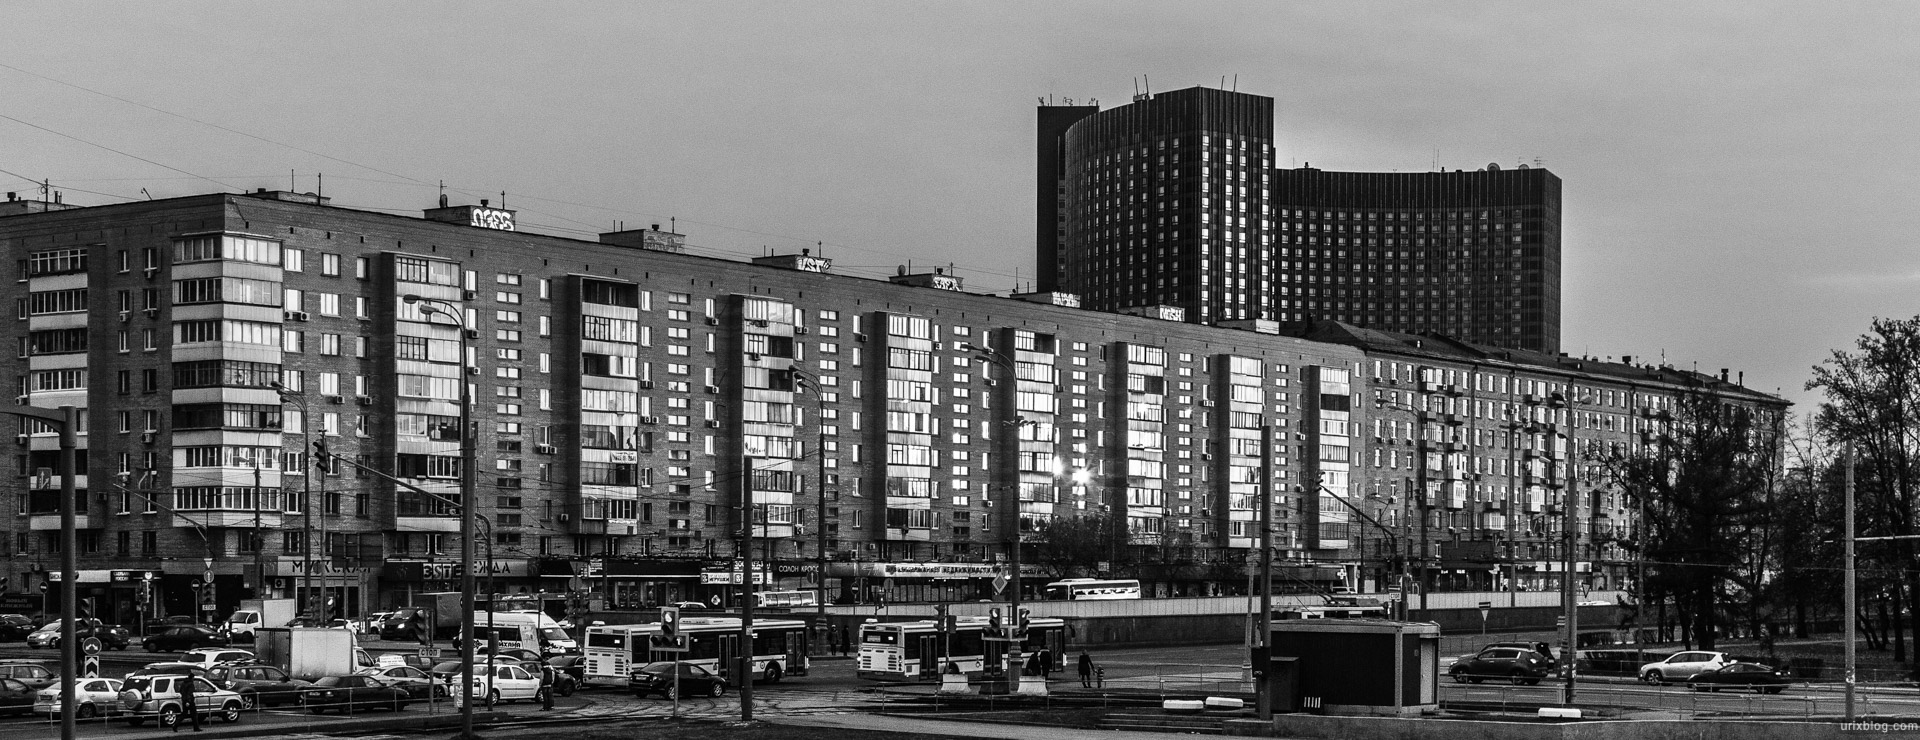 2014, Prospect Mira, Peace avenue, 182, house, VDNKh, Moscow, USSR, Russia, panorama, windows, BW, black and white